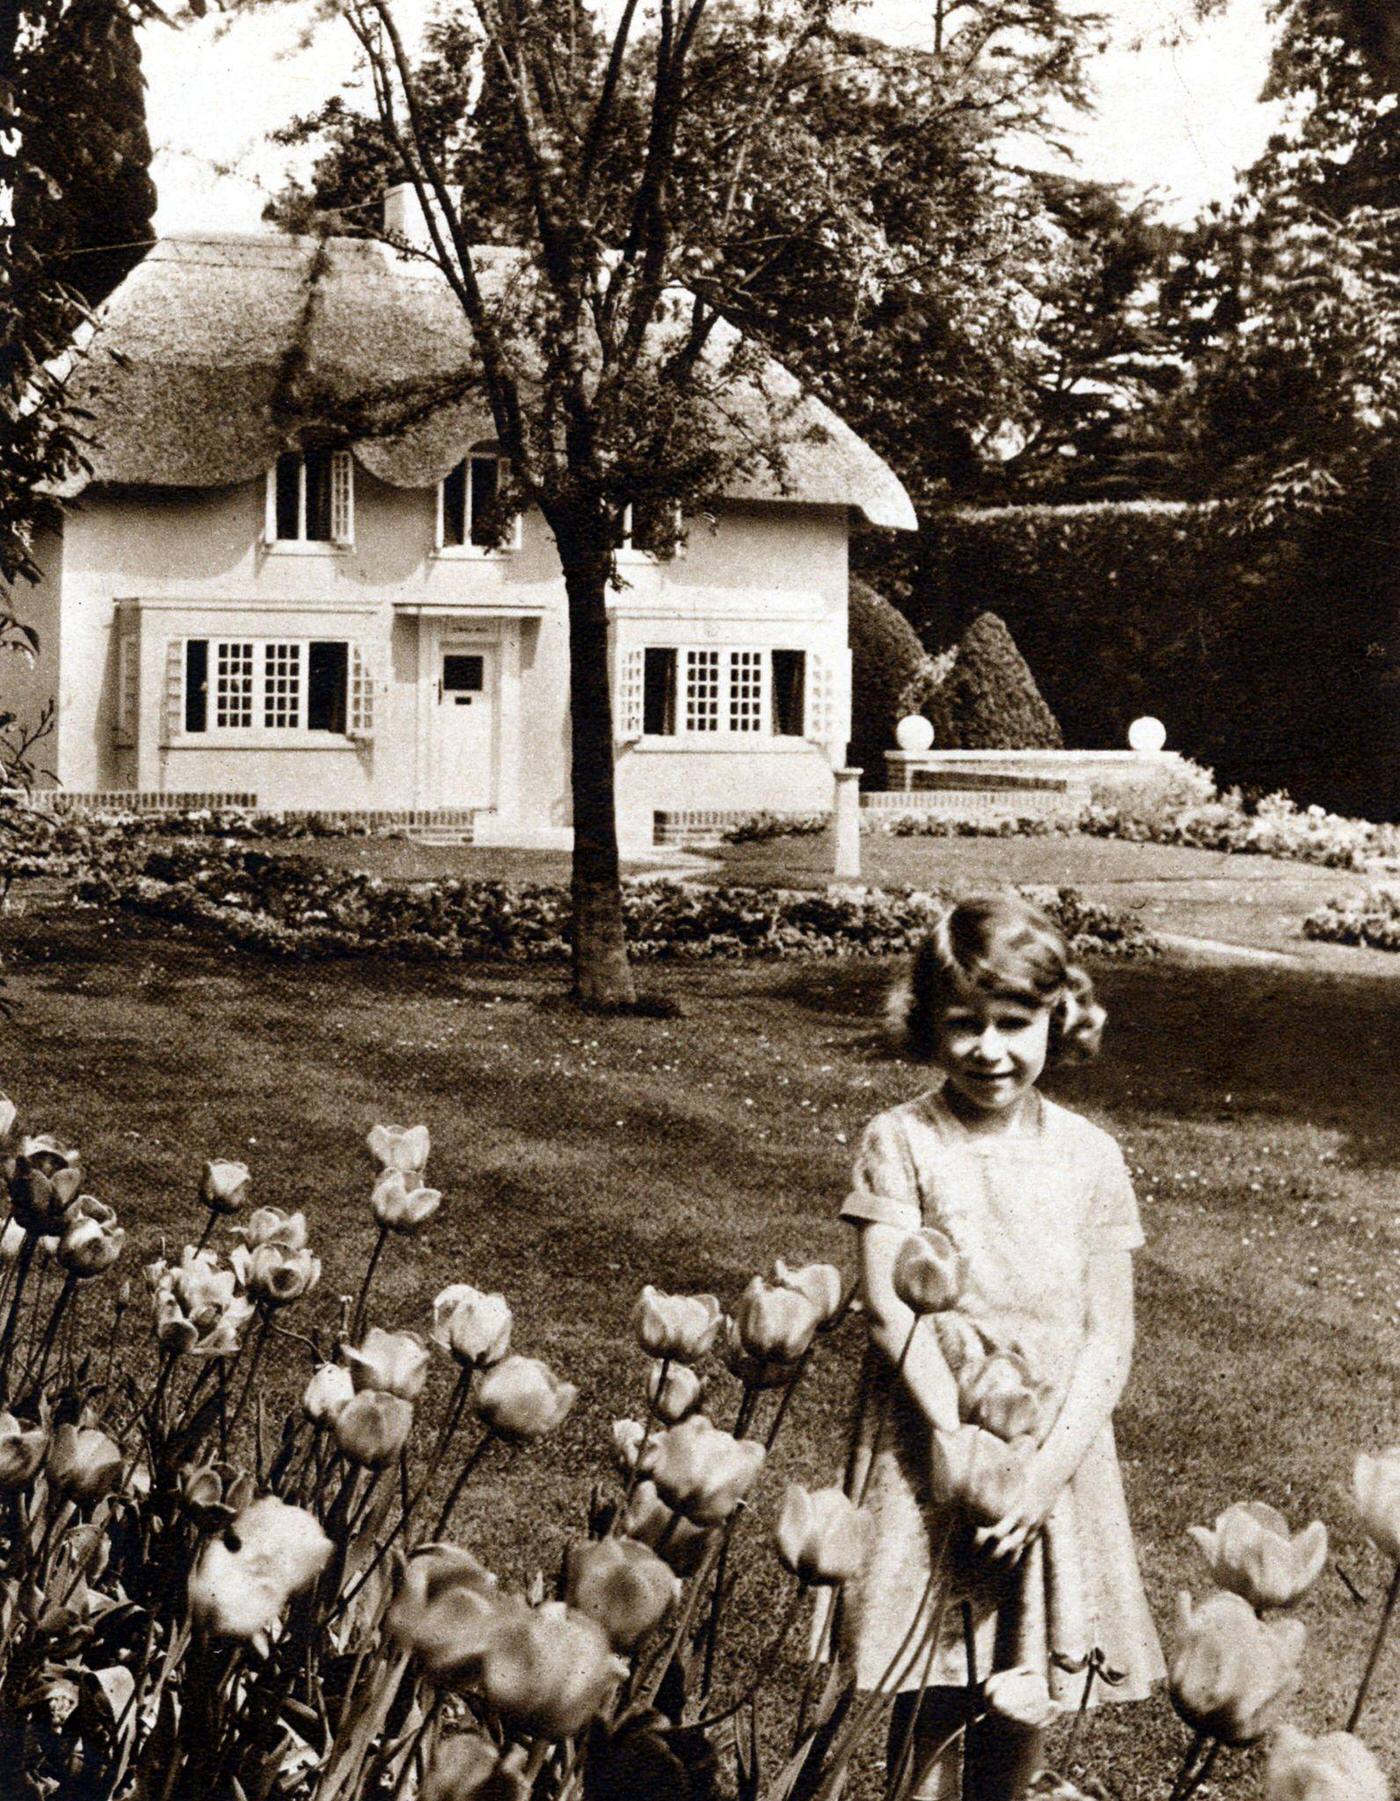 Princess Elizabeth as a child in the garden of the Royal Lodge, Windsor with Y Bwthyn Bach (The Little House), the playhouse given to her by the people of Wales.